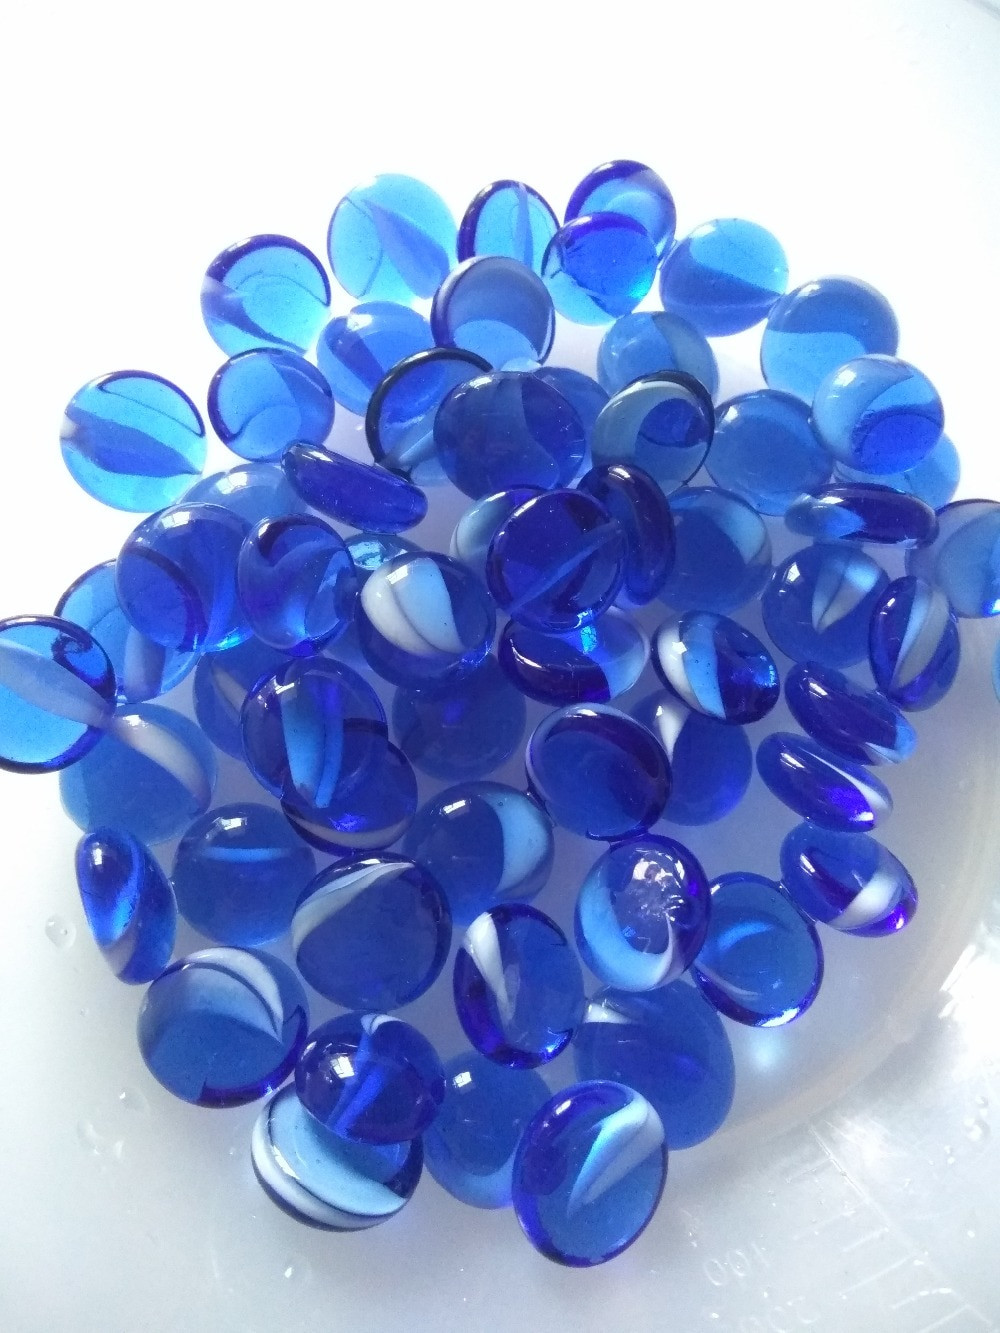 Fish Bowl Vases wholesale Of Aliexpress Com Buy Blue White Color Flat Glass Beads Cats Eye Throughout Aliexpress Com Buy Blue White Color Flat Glass Beads Cats Eye Stickers Home Fish Tank Vase Filler Pavement Mosaic Gardening Decoration From Reliable